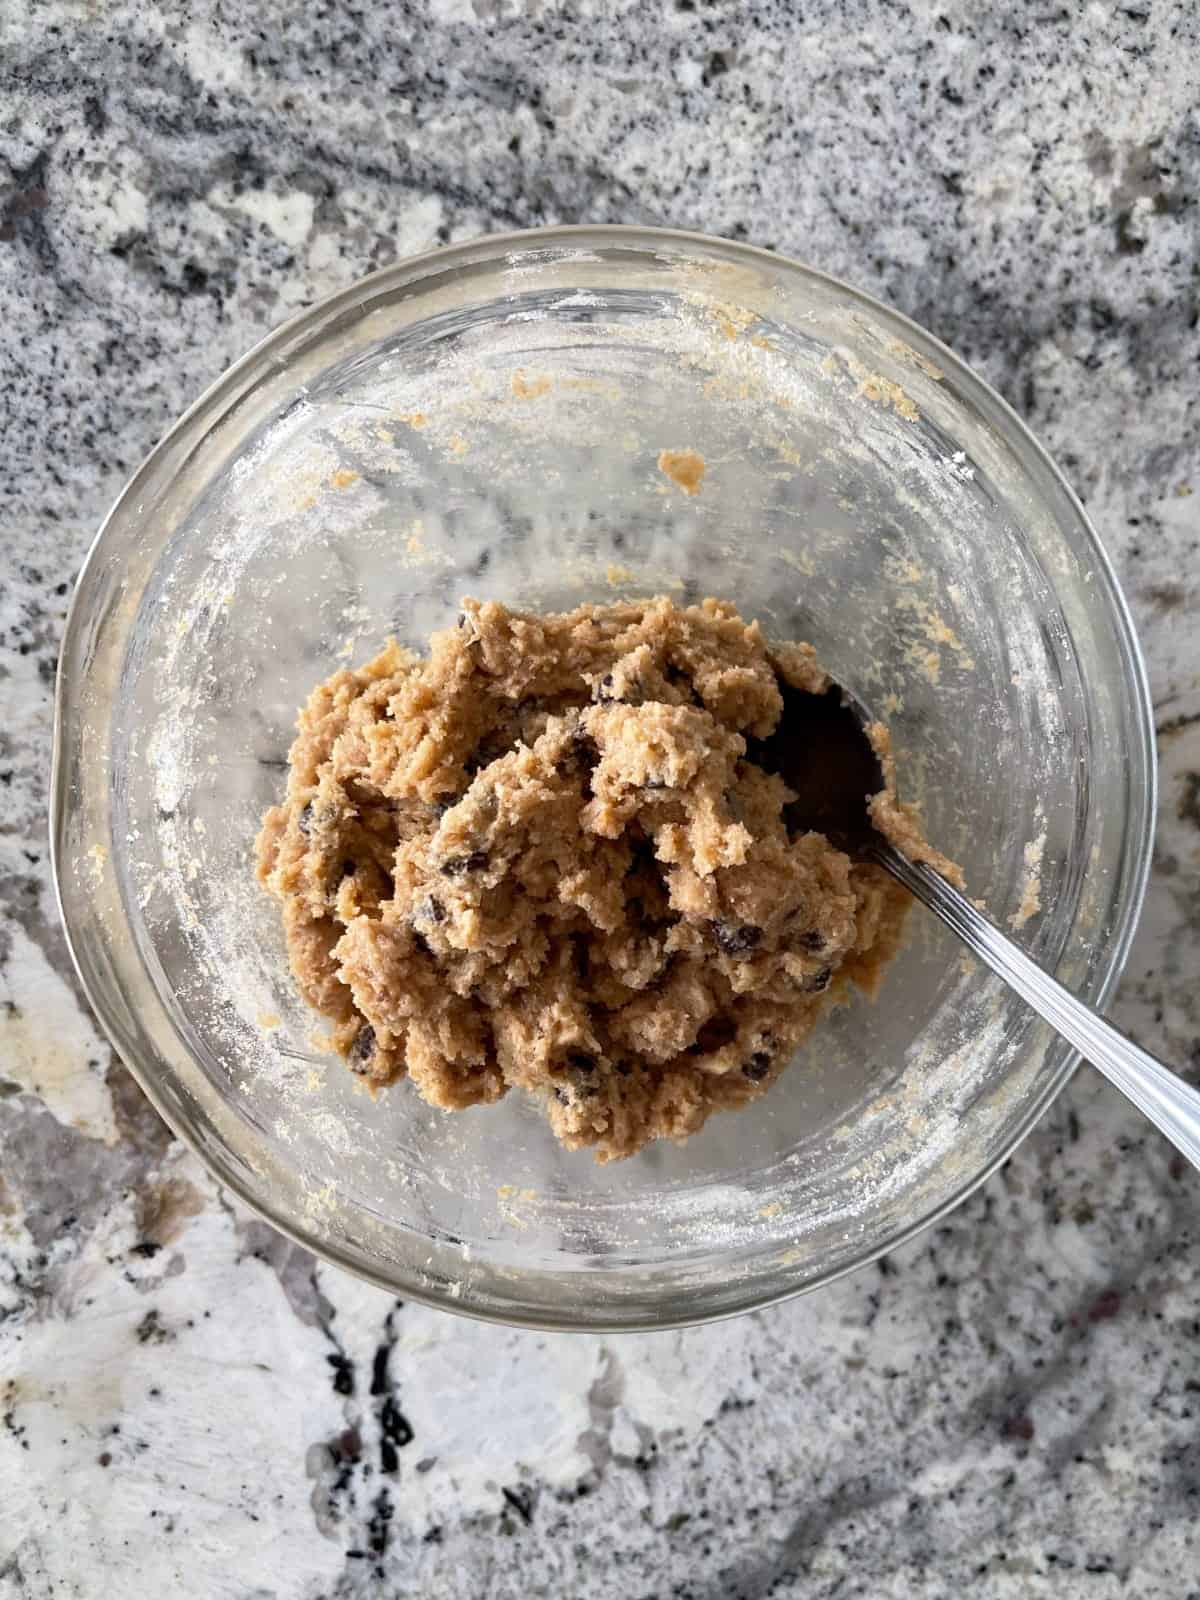 Mixing chocolate chip cookie dough batter in small glass bowl with spoon.